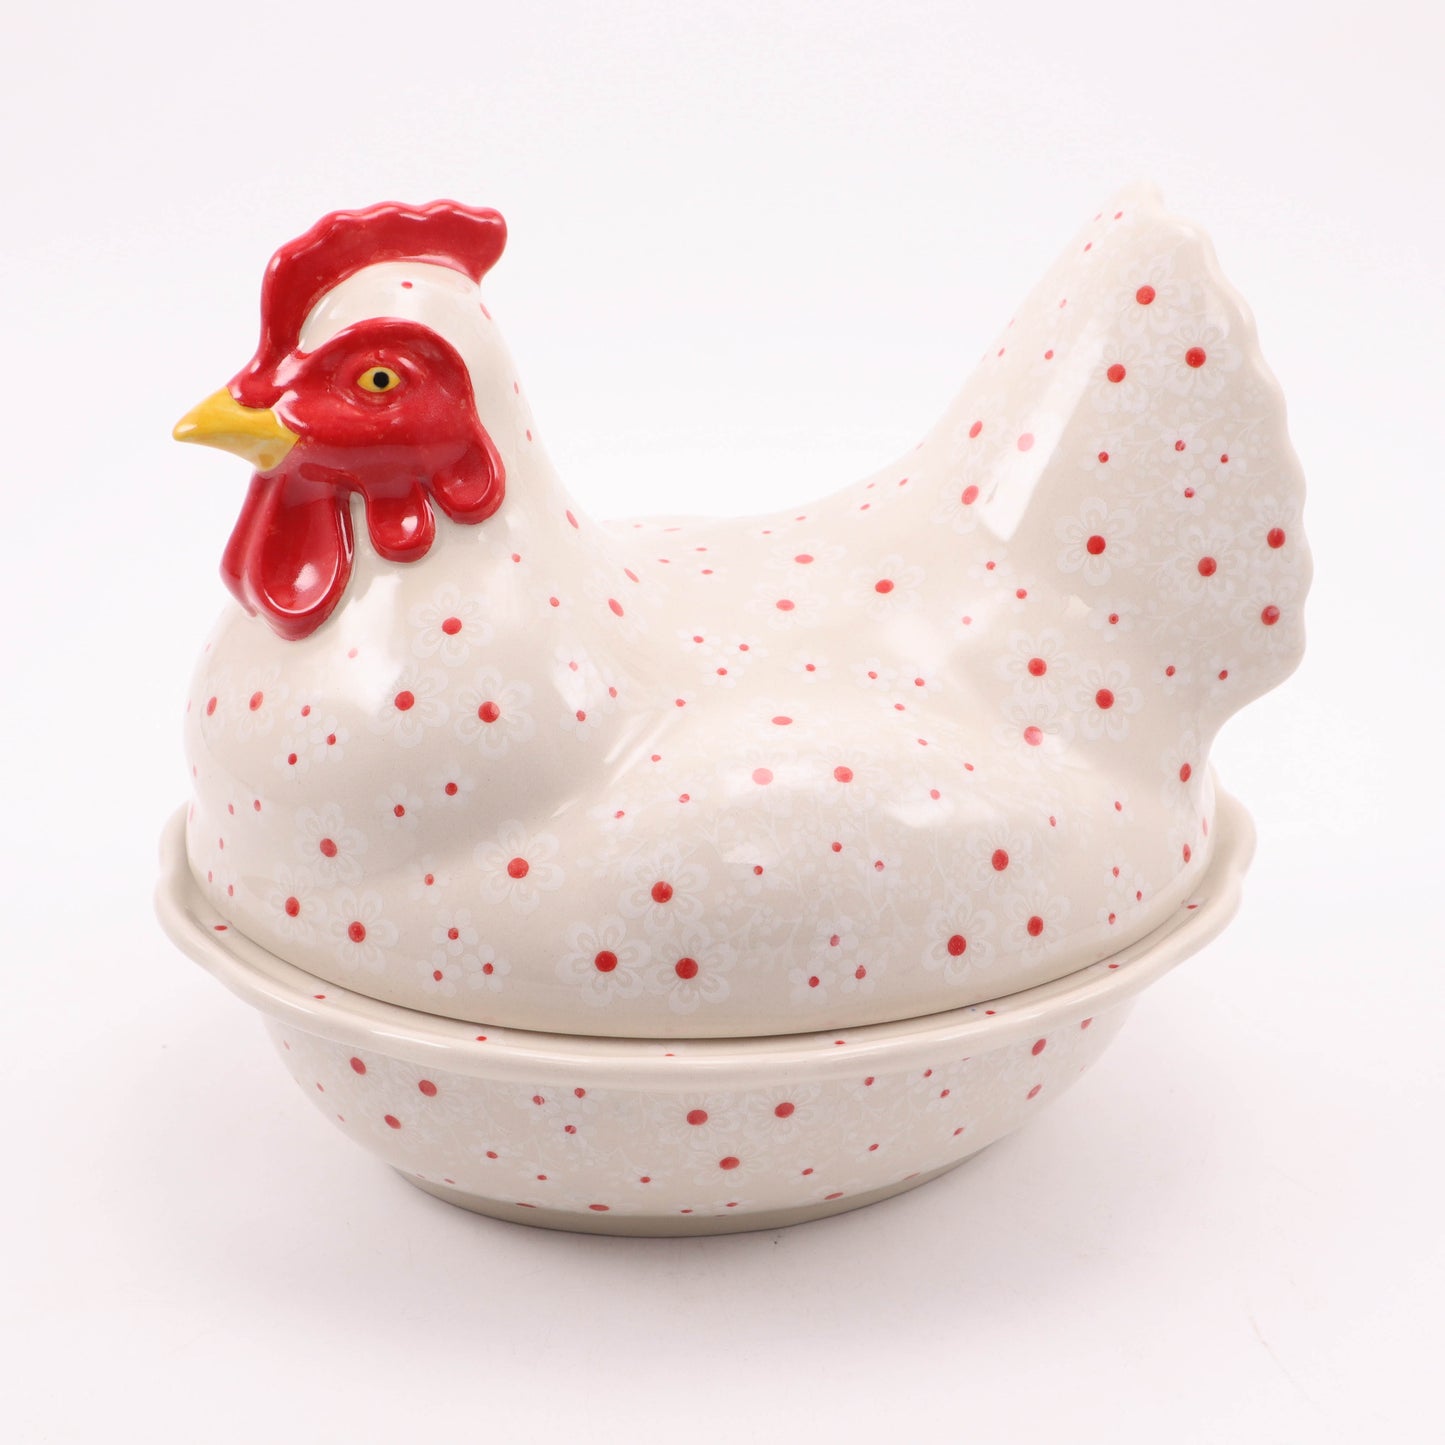 9"x8"x8" Hen Container. Pattern: Sugar and Spice